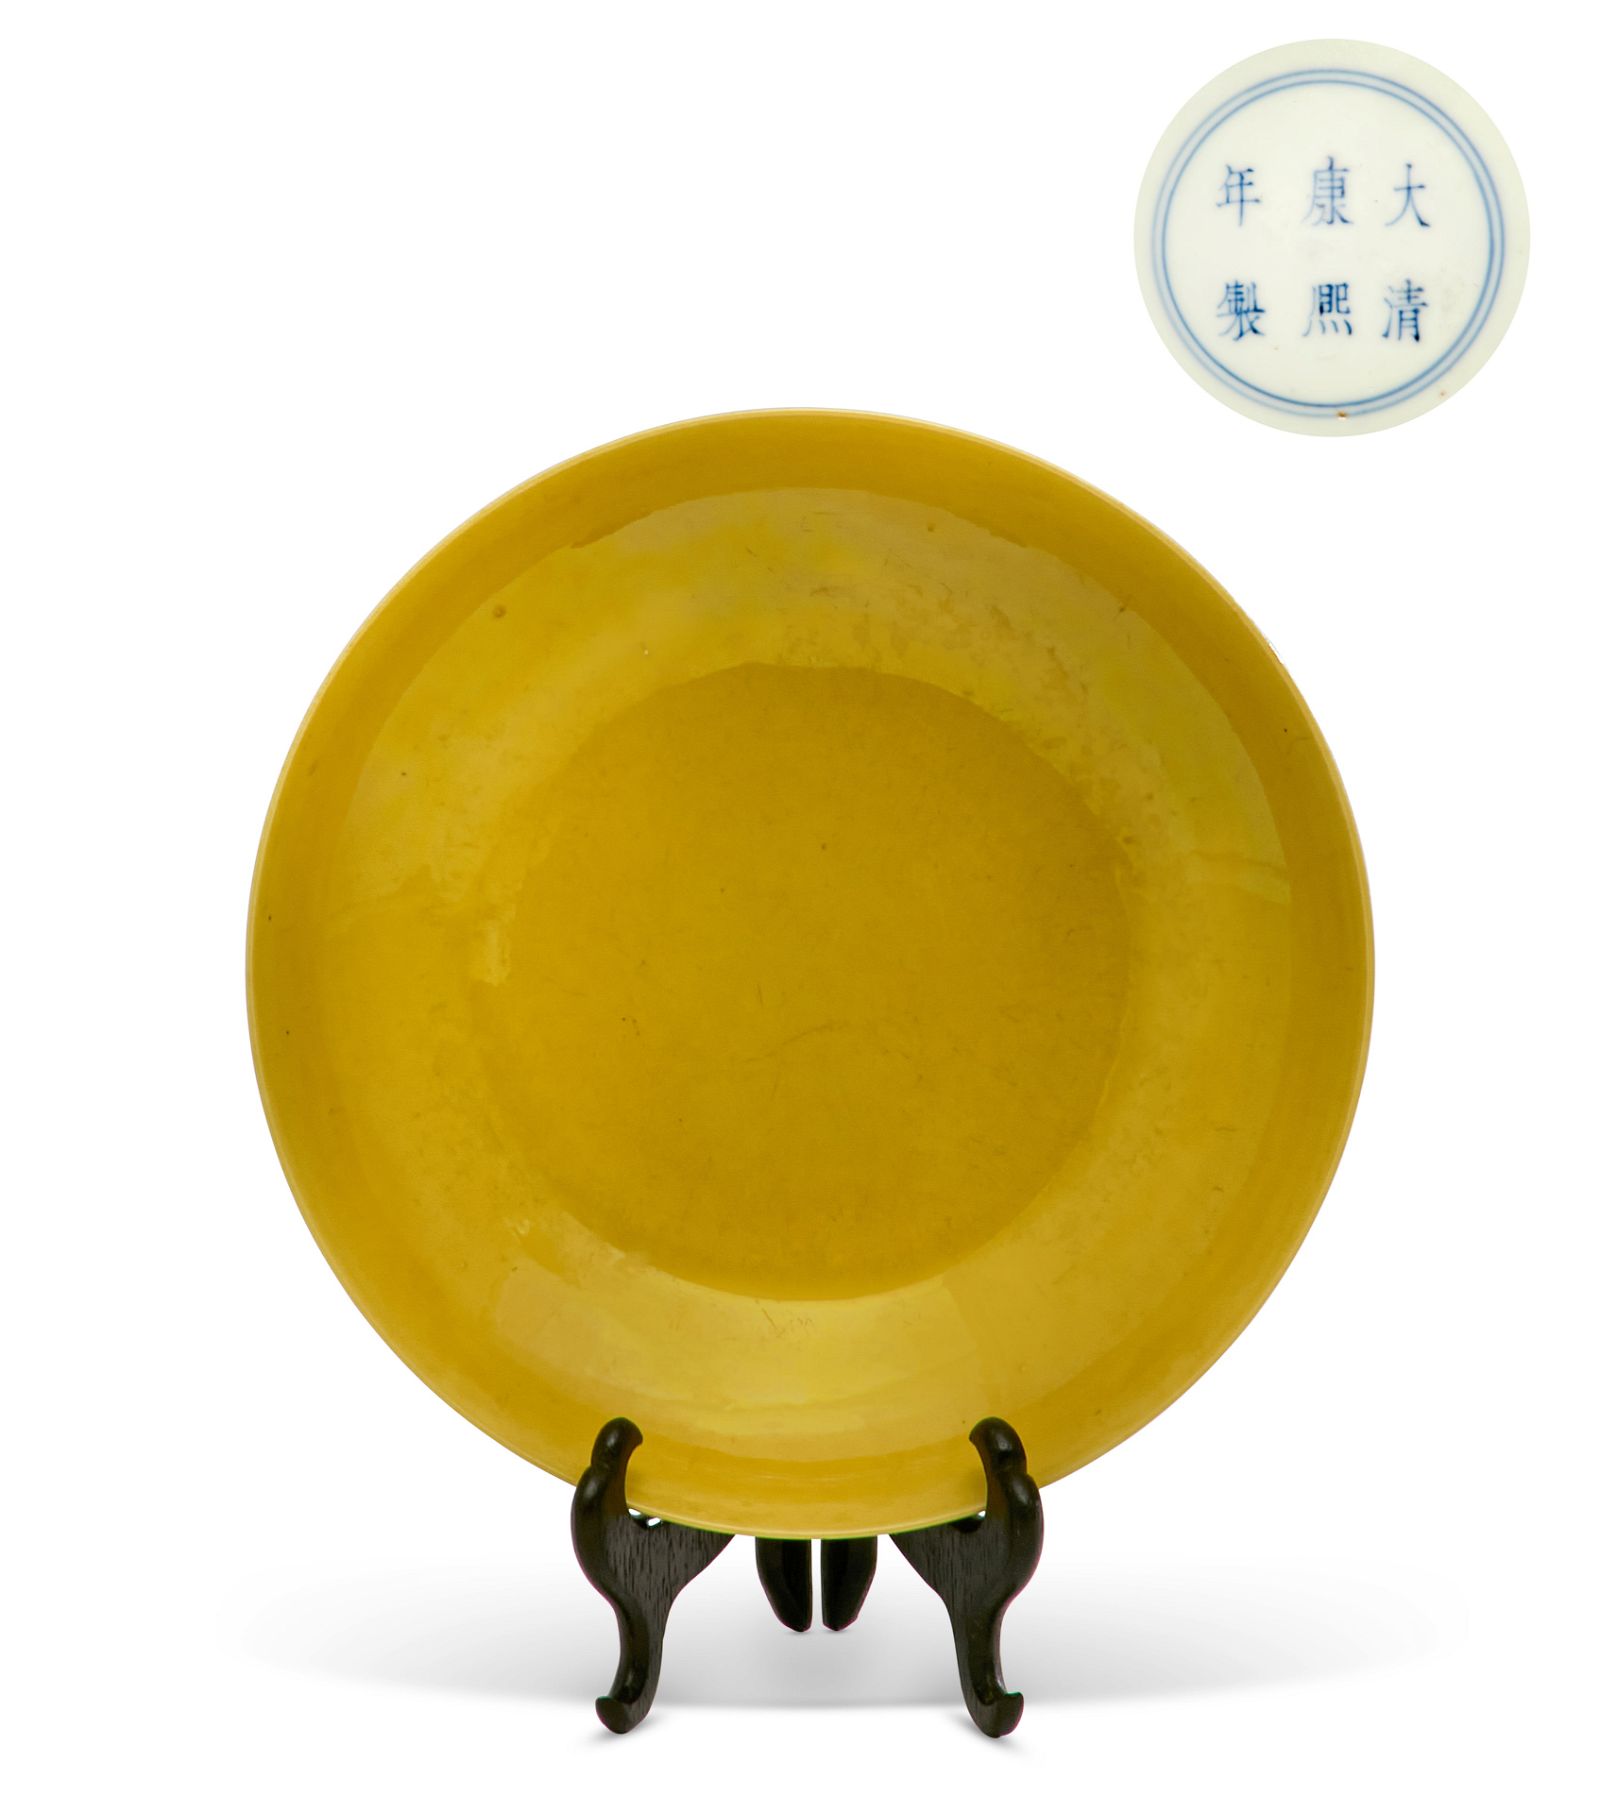 A CHINESE YELLOW GLAZED PORCELAIN